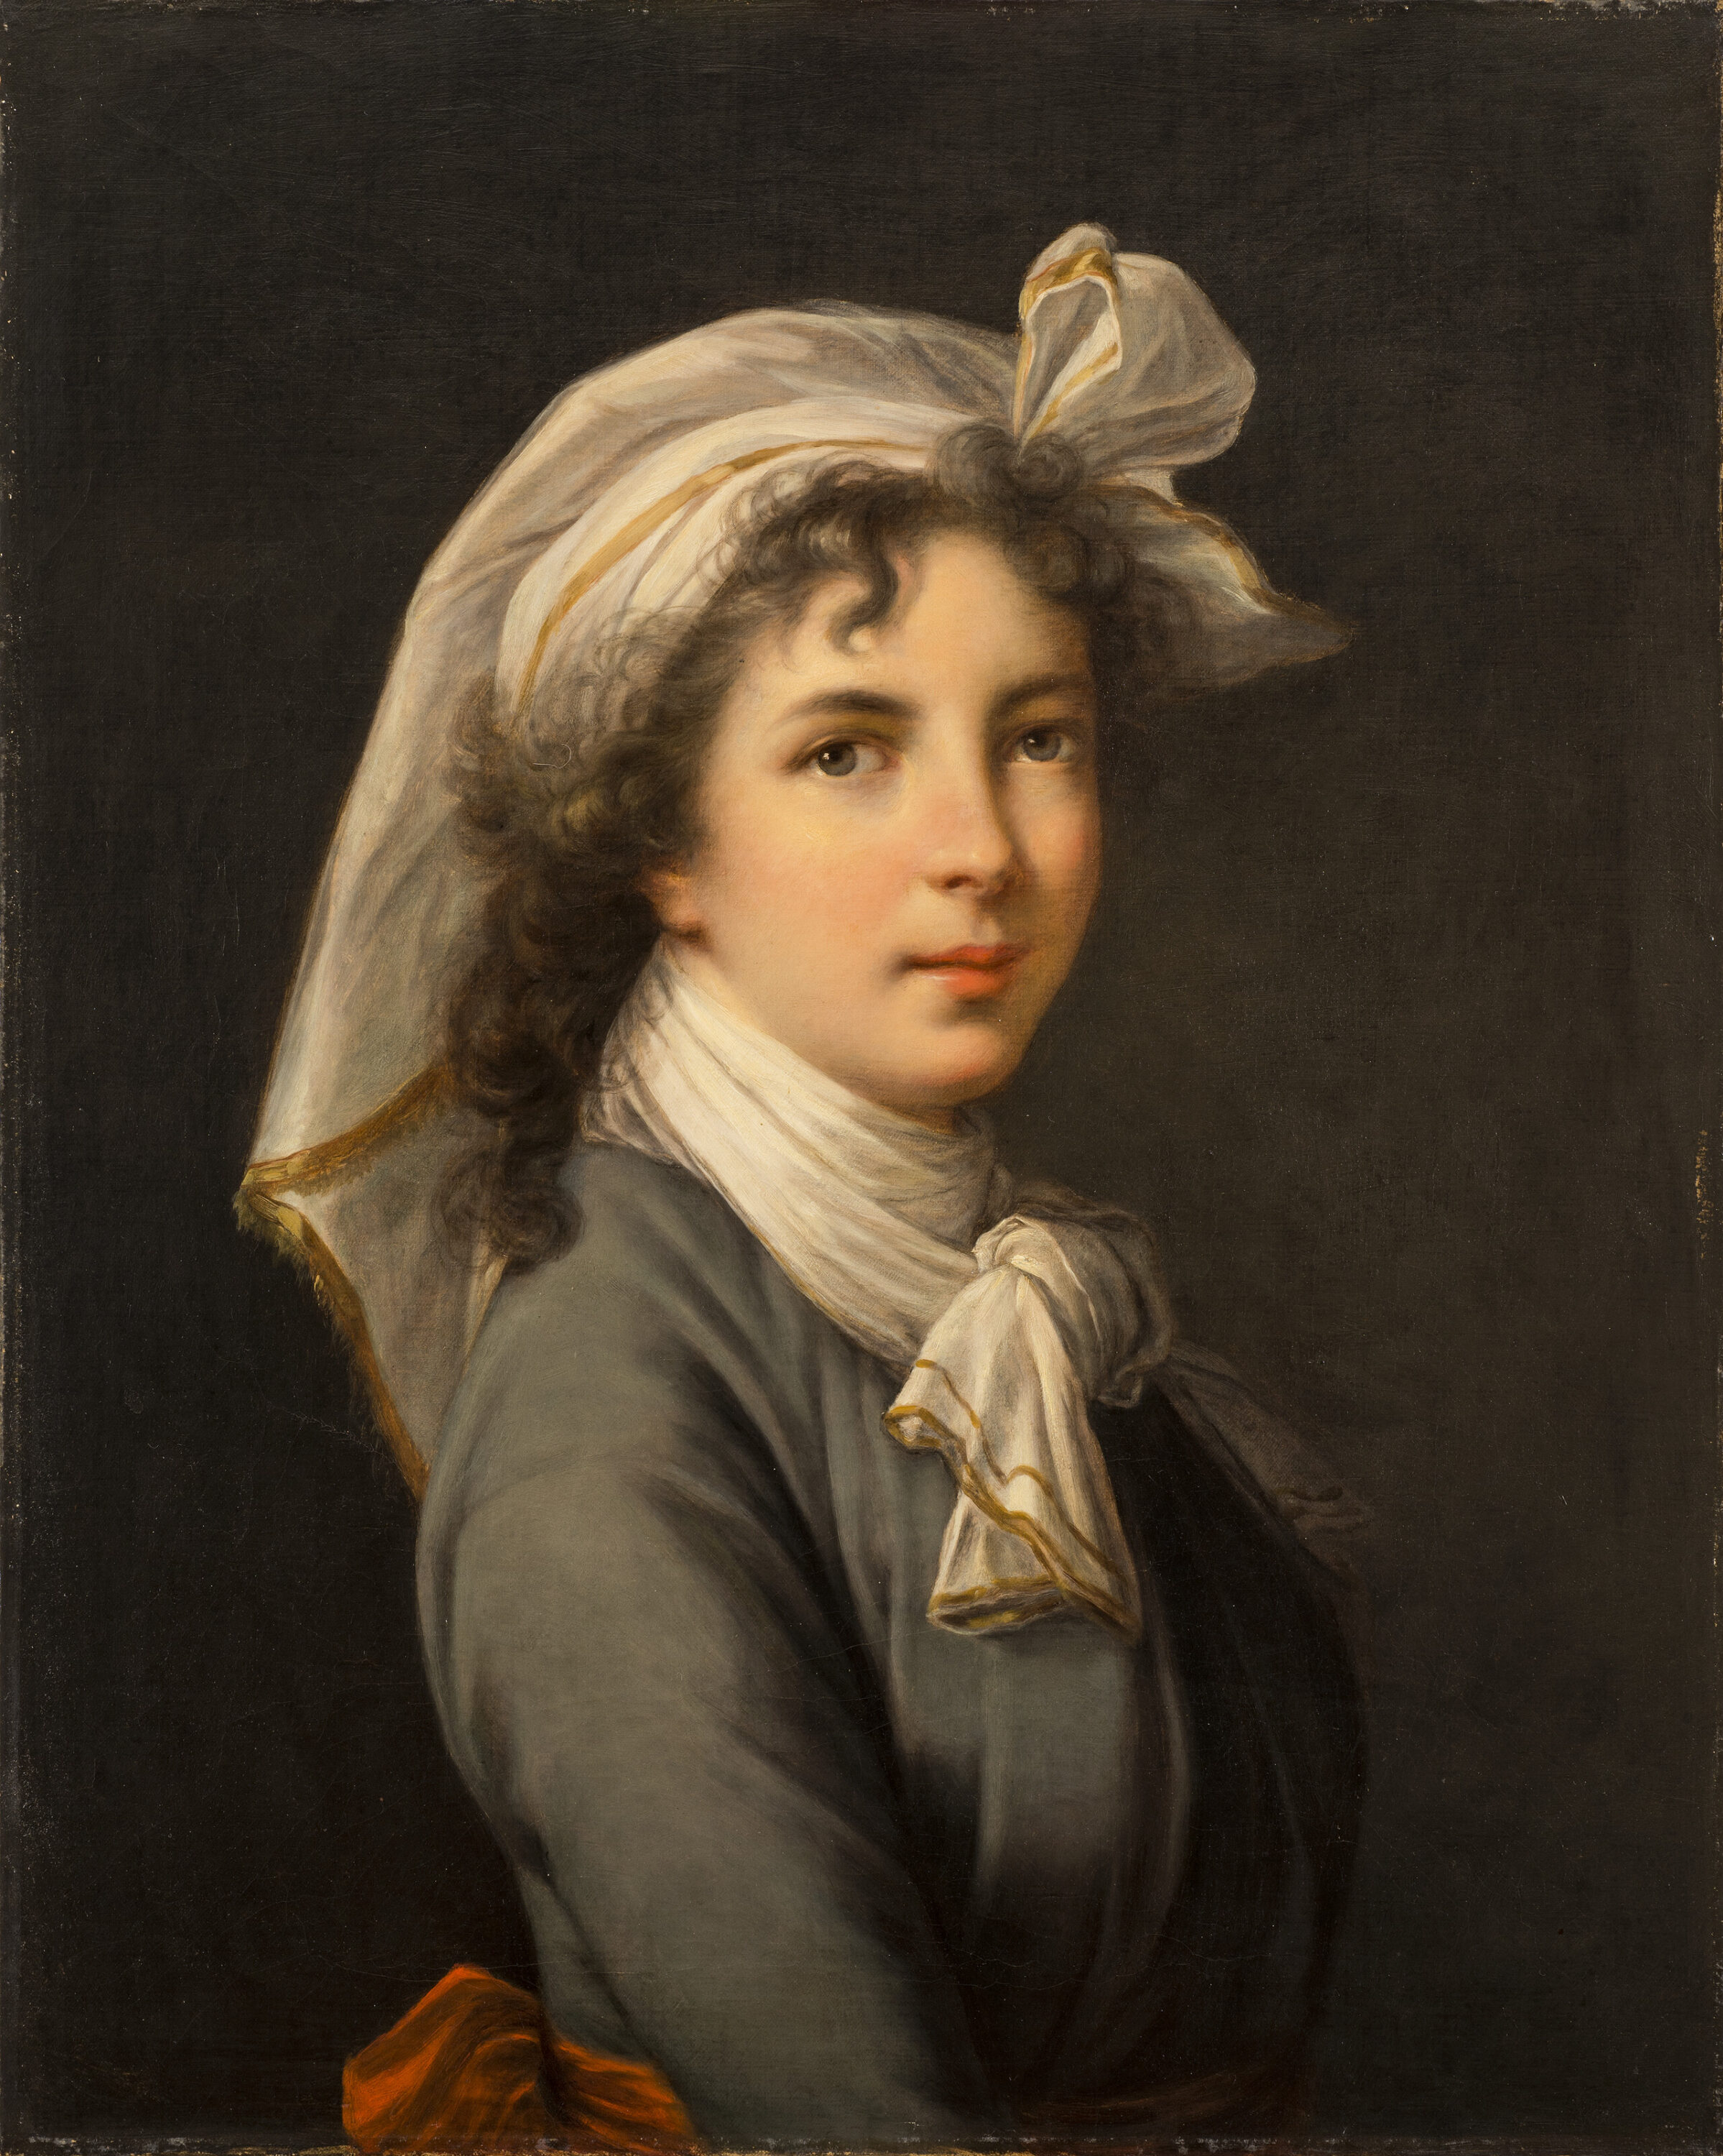 A portrait of a light-skinned woman with powdered brown hair tucked under a white wrap with a golden border. She is wearing a blue jacket with a red sash tied around her waist.